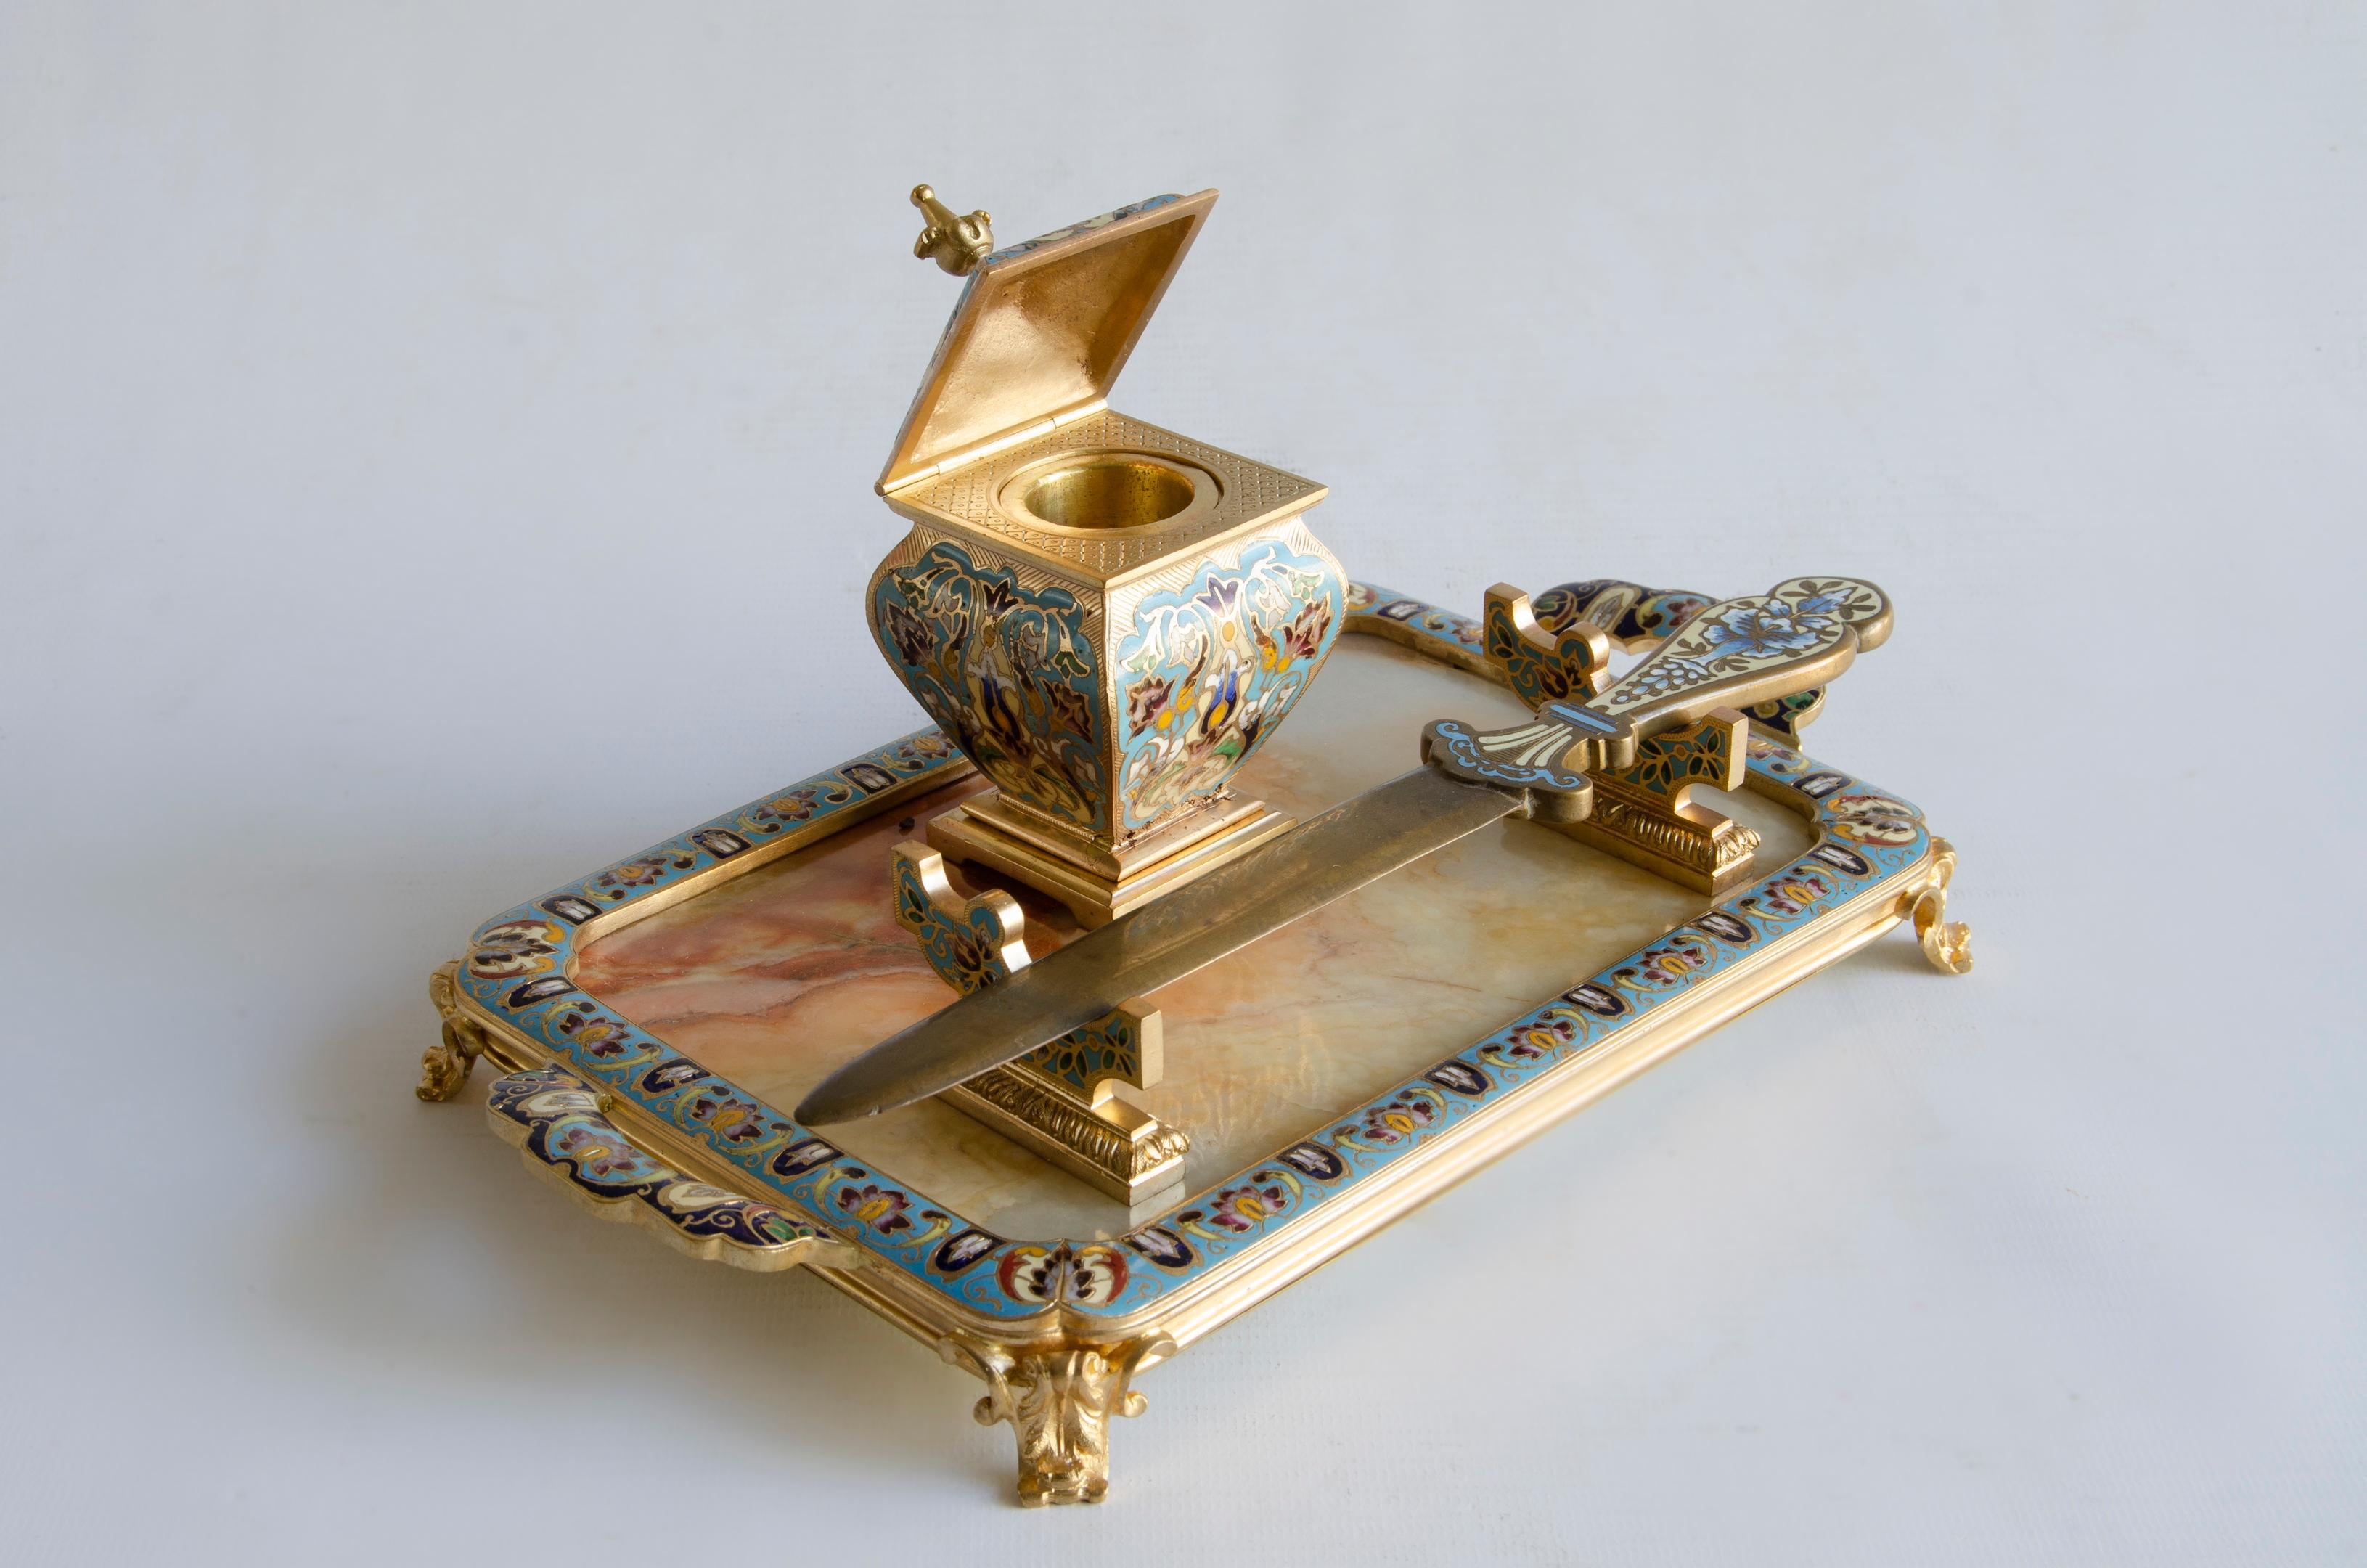 Napoleon III inkwell
gilt bronz and champleve enamel
Origin France
perfect condition
circa 1860.
The Napoleon III style had its heyday during the 1850s and 1880s. Emperor Napoleon wanted to emulate the lavishness and elegance of the First Empire.